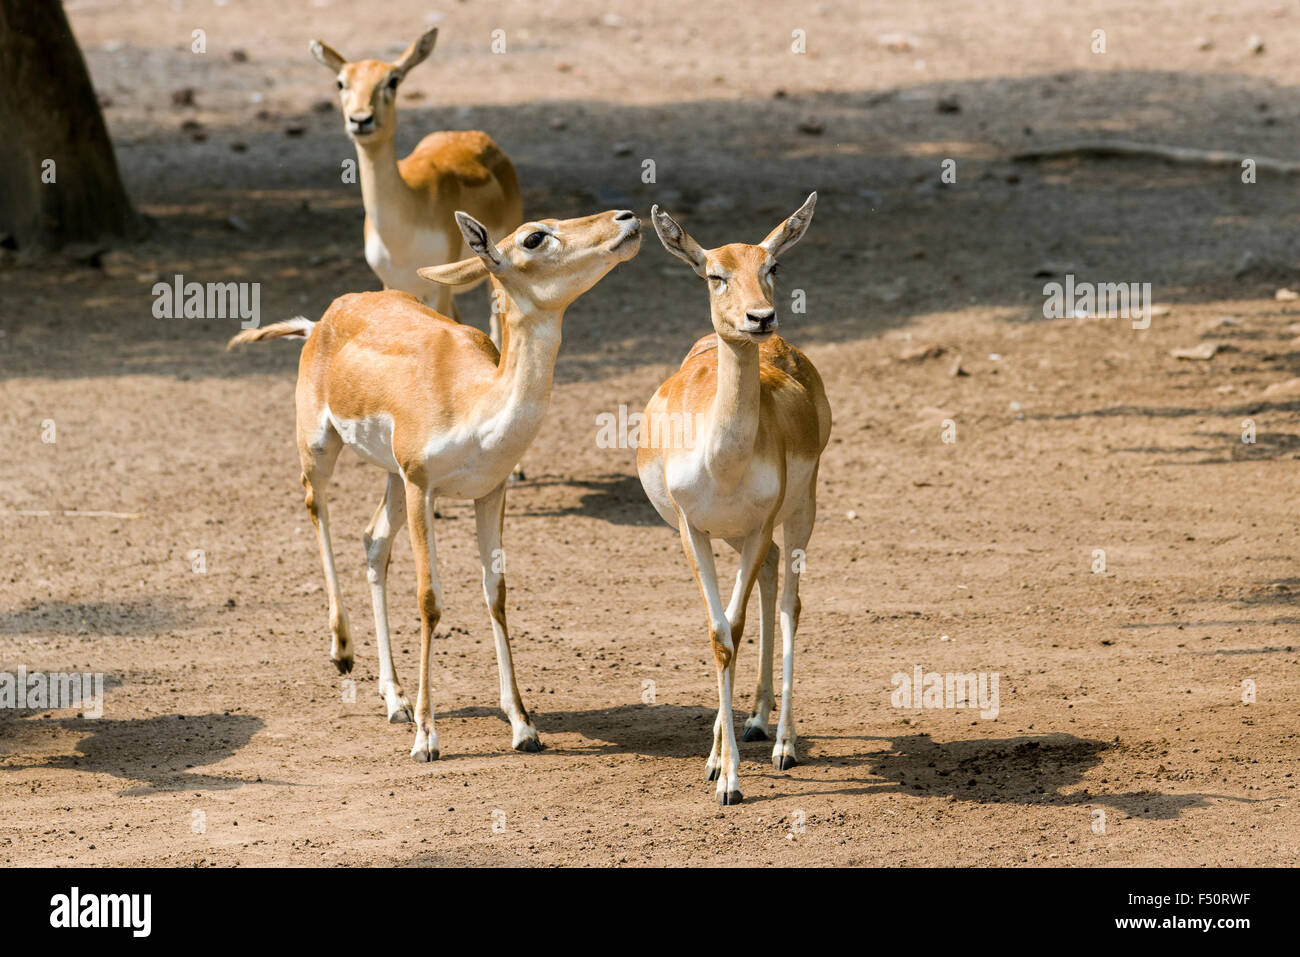 A small group of female White Buck (Antilope cervicarpa) is standing together in the zoo Stock Photo